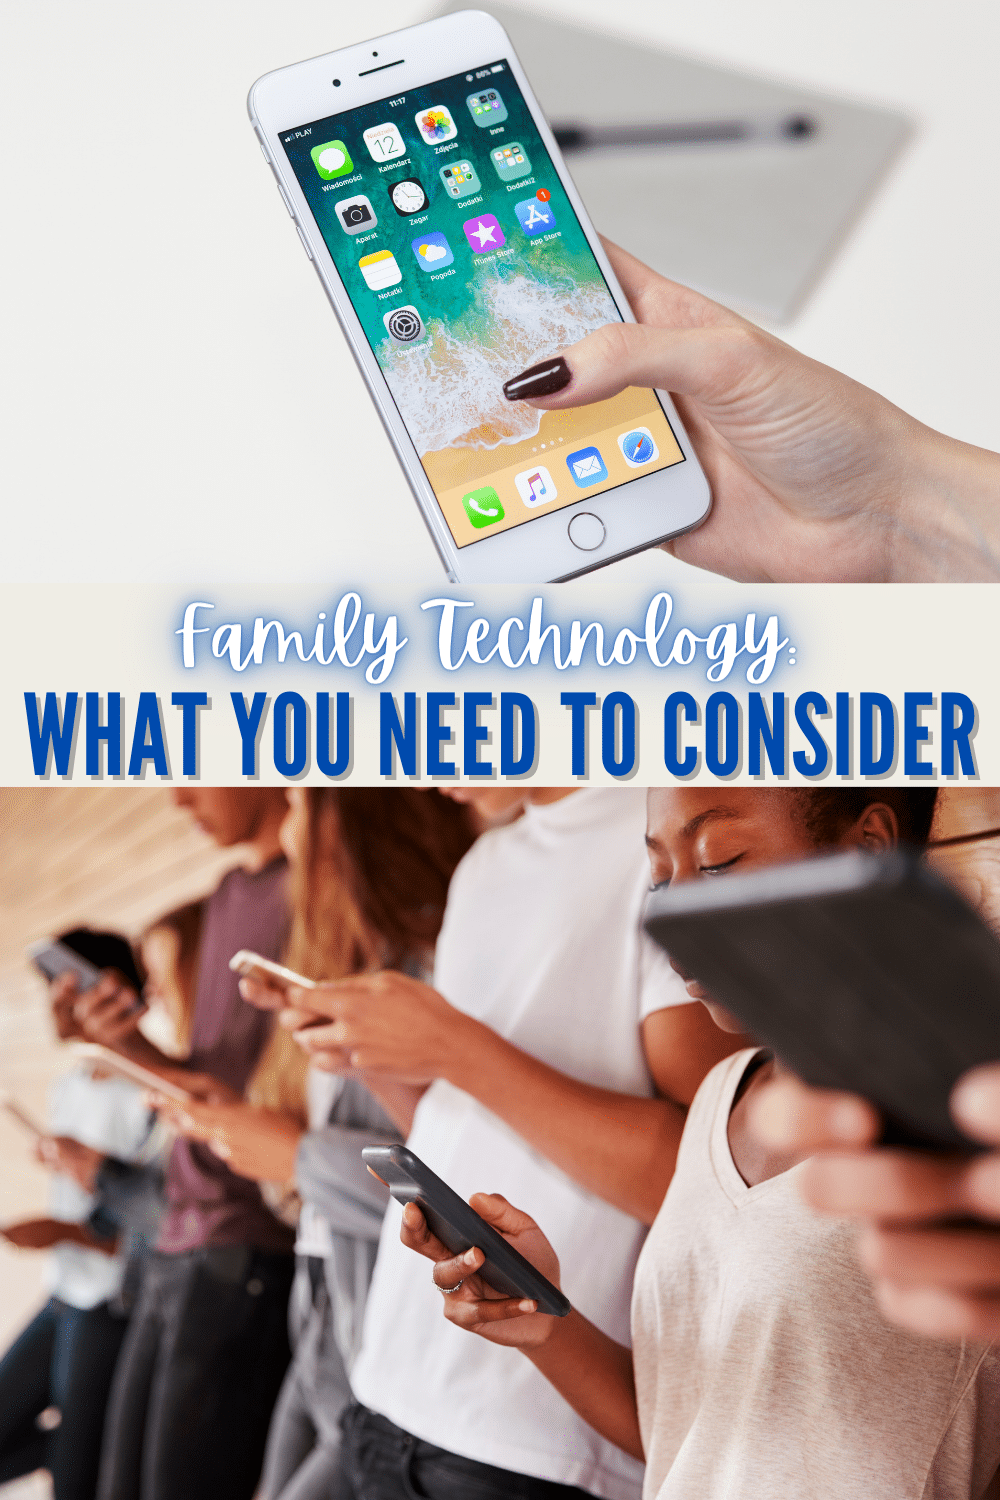 Family technology is a major issue for most parents. If you're worried about its effect on your family, here are some helpful resources. #familytechnology #parentingtips #parentingresources via @wondermomwannab